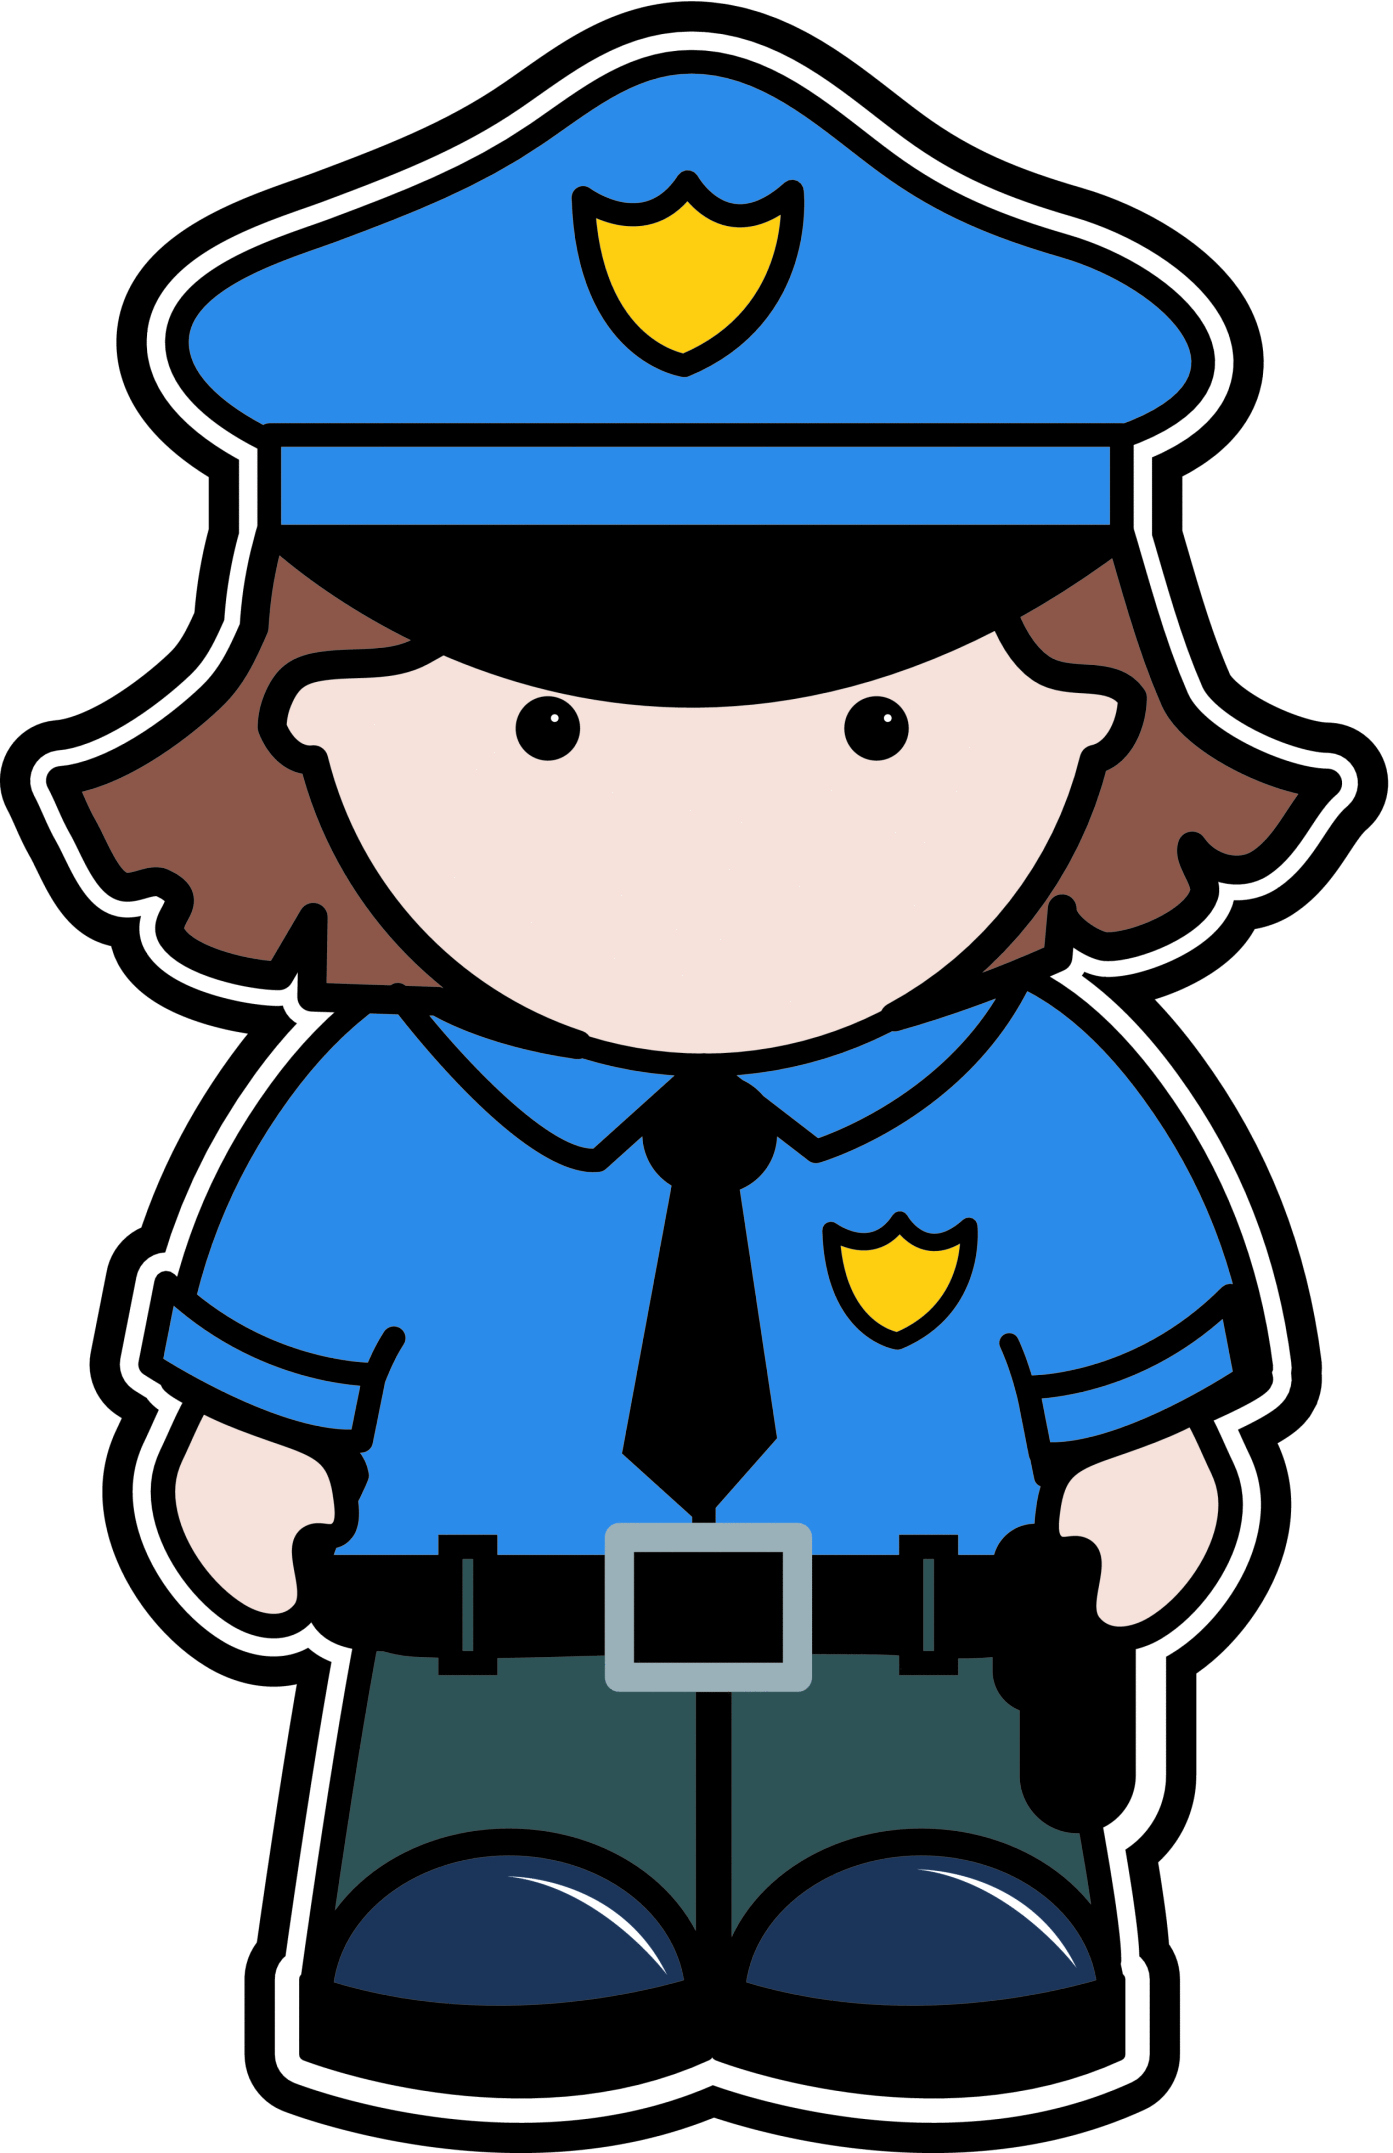 Police officer free clipart i - Clipart Police